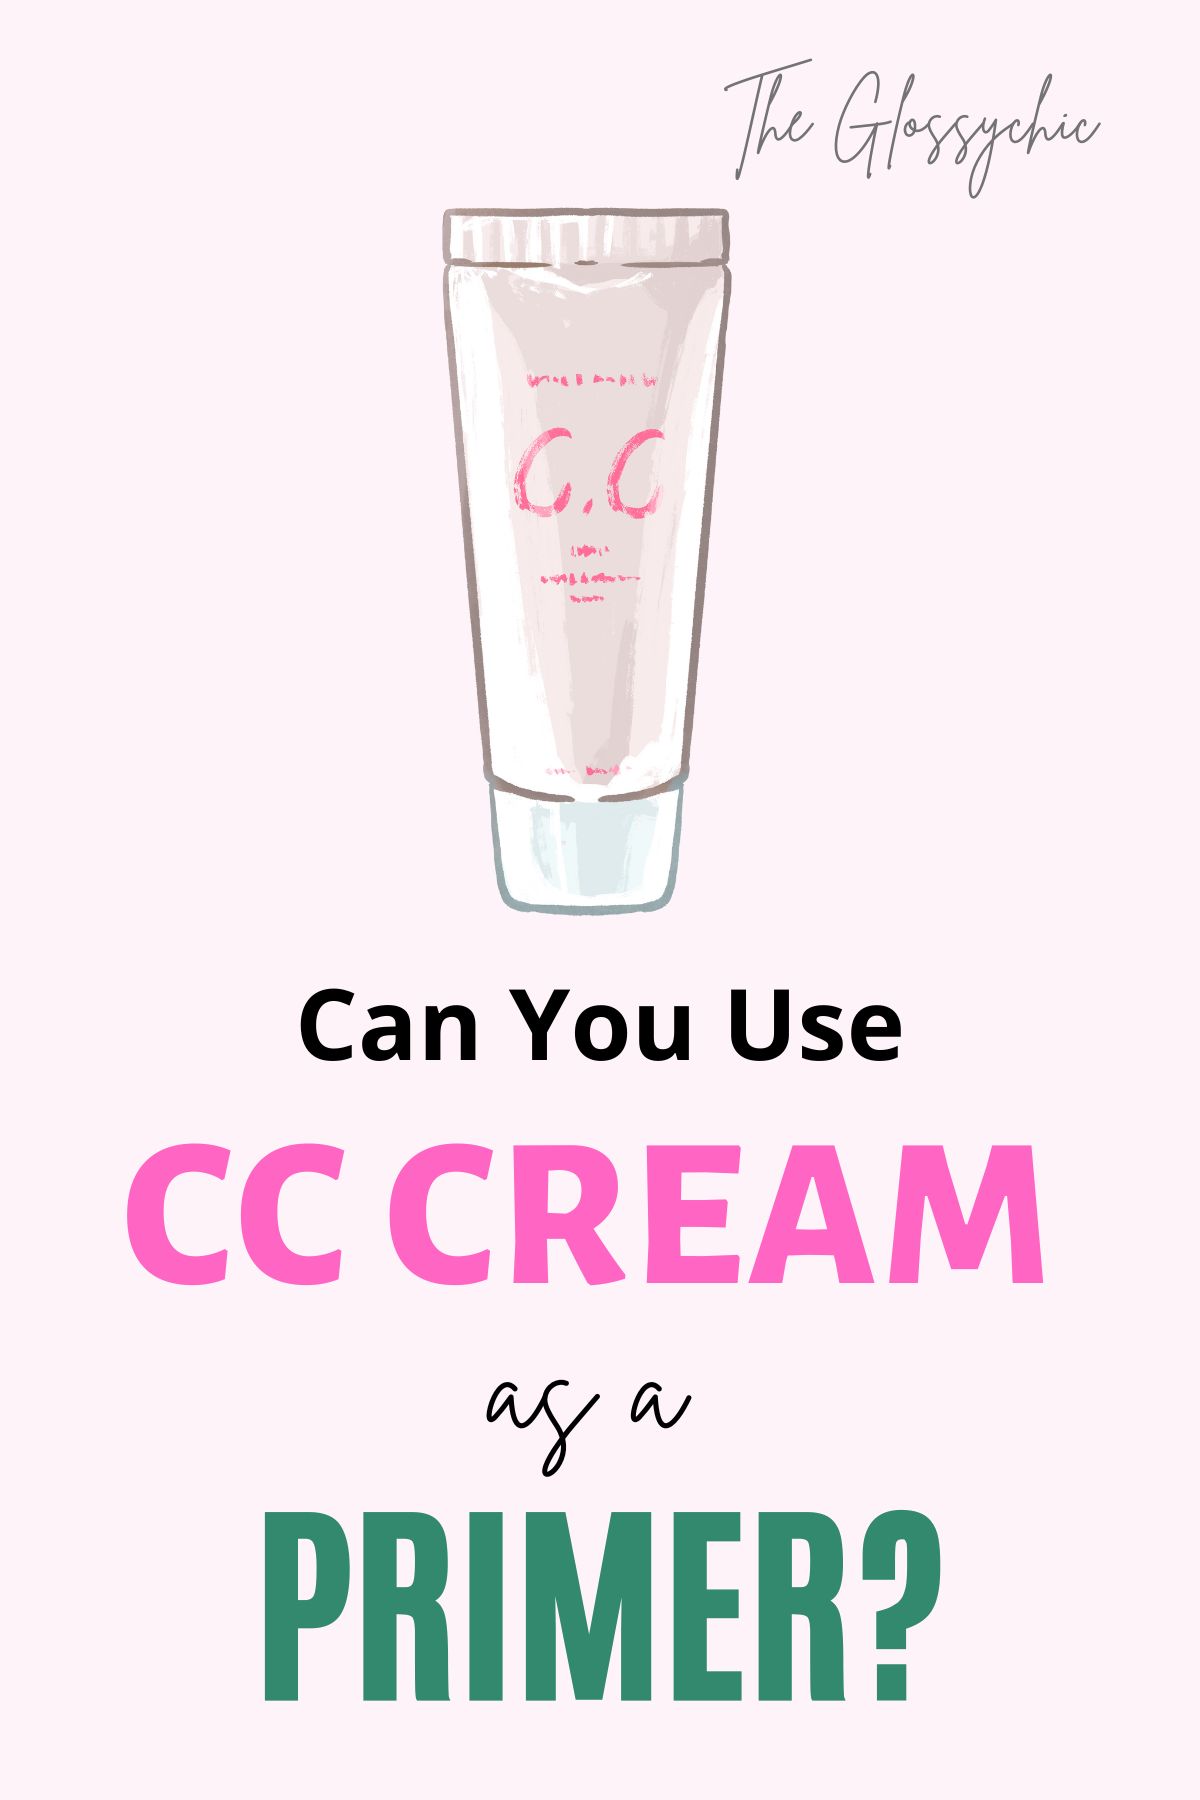 But no matter what quality skincare products you invest in, your face starts looking either cakey or dry in only a few hours. So, is there no way to make makeup completely hassle-free? Well, beauty experts call this innovative solution a CC Cream. Read on to know why.